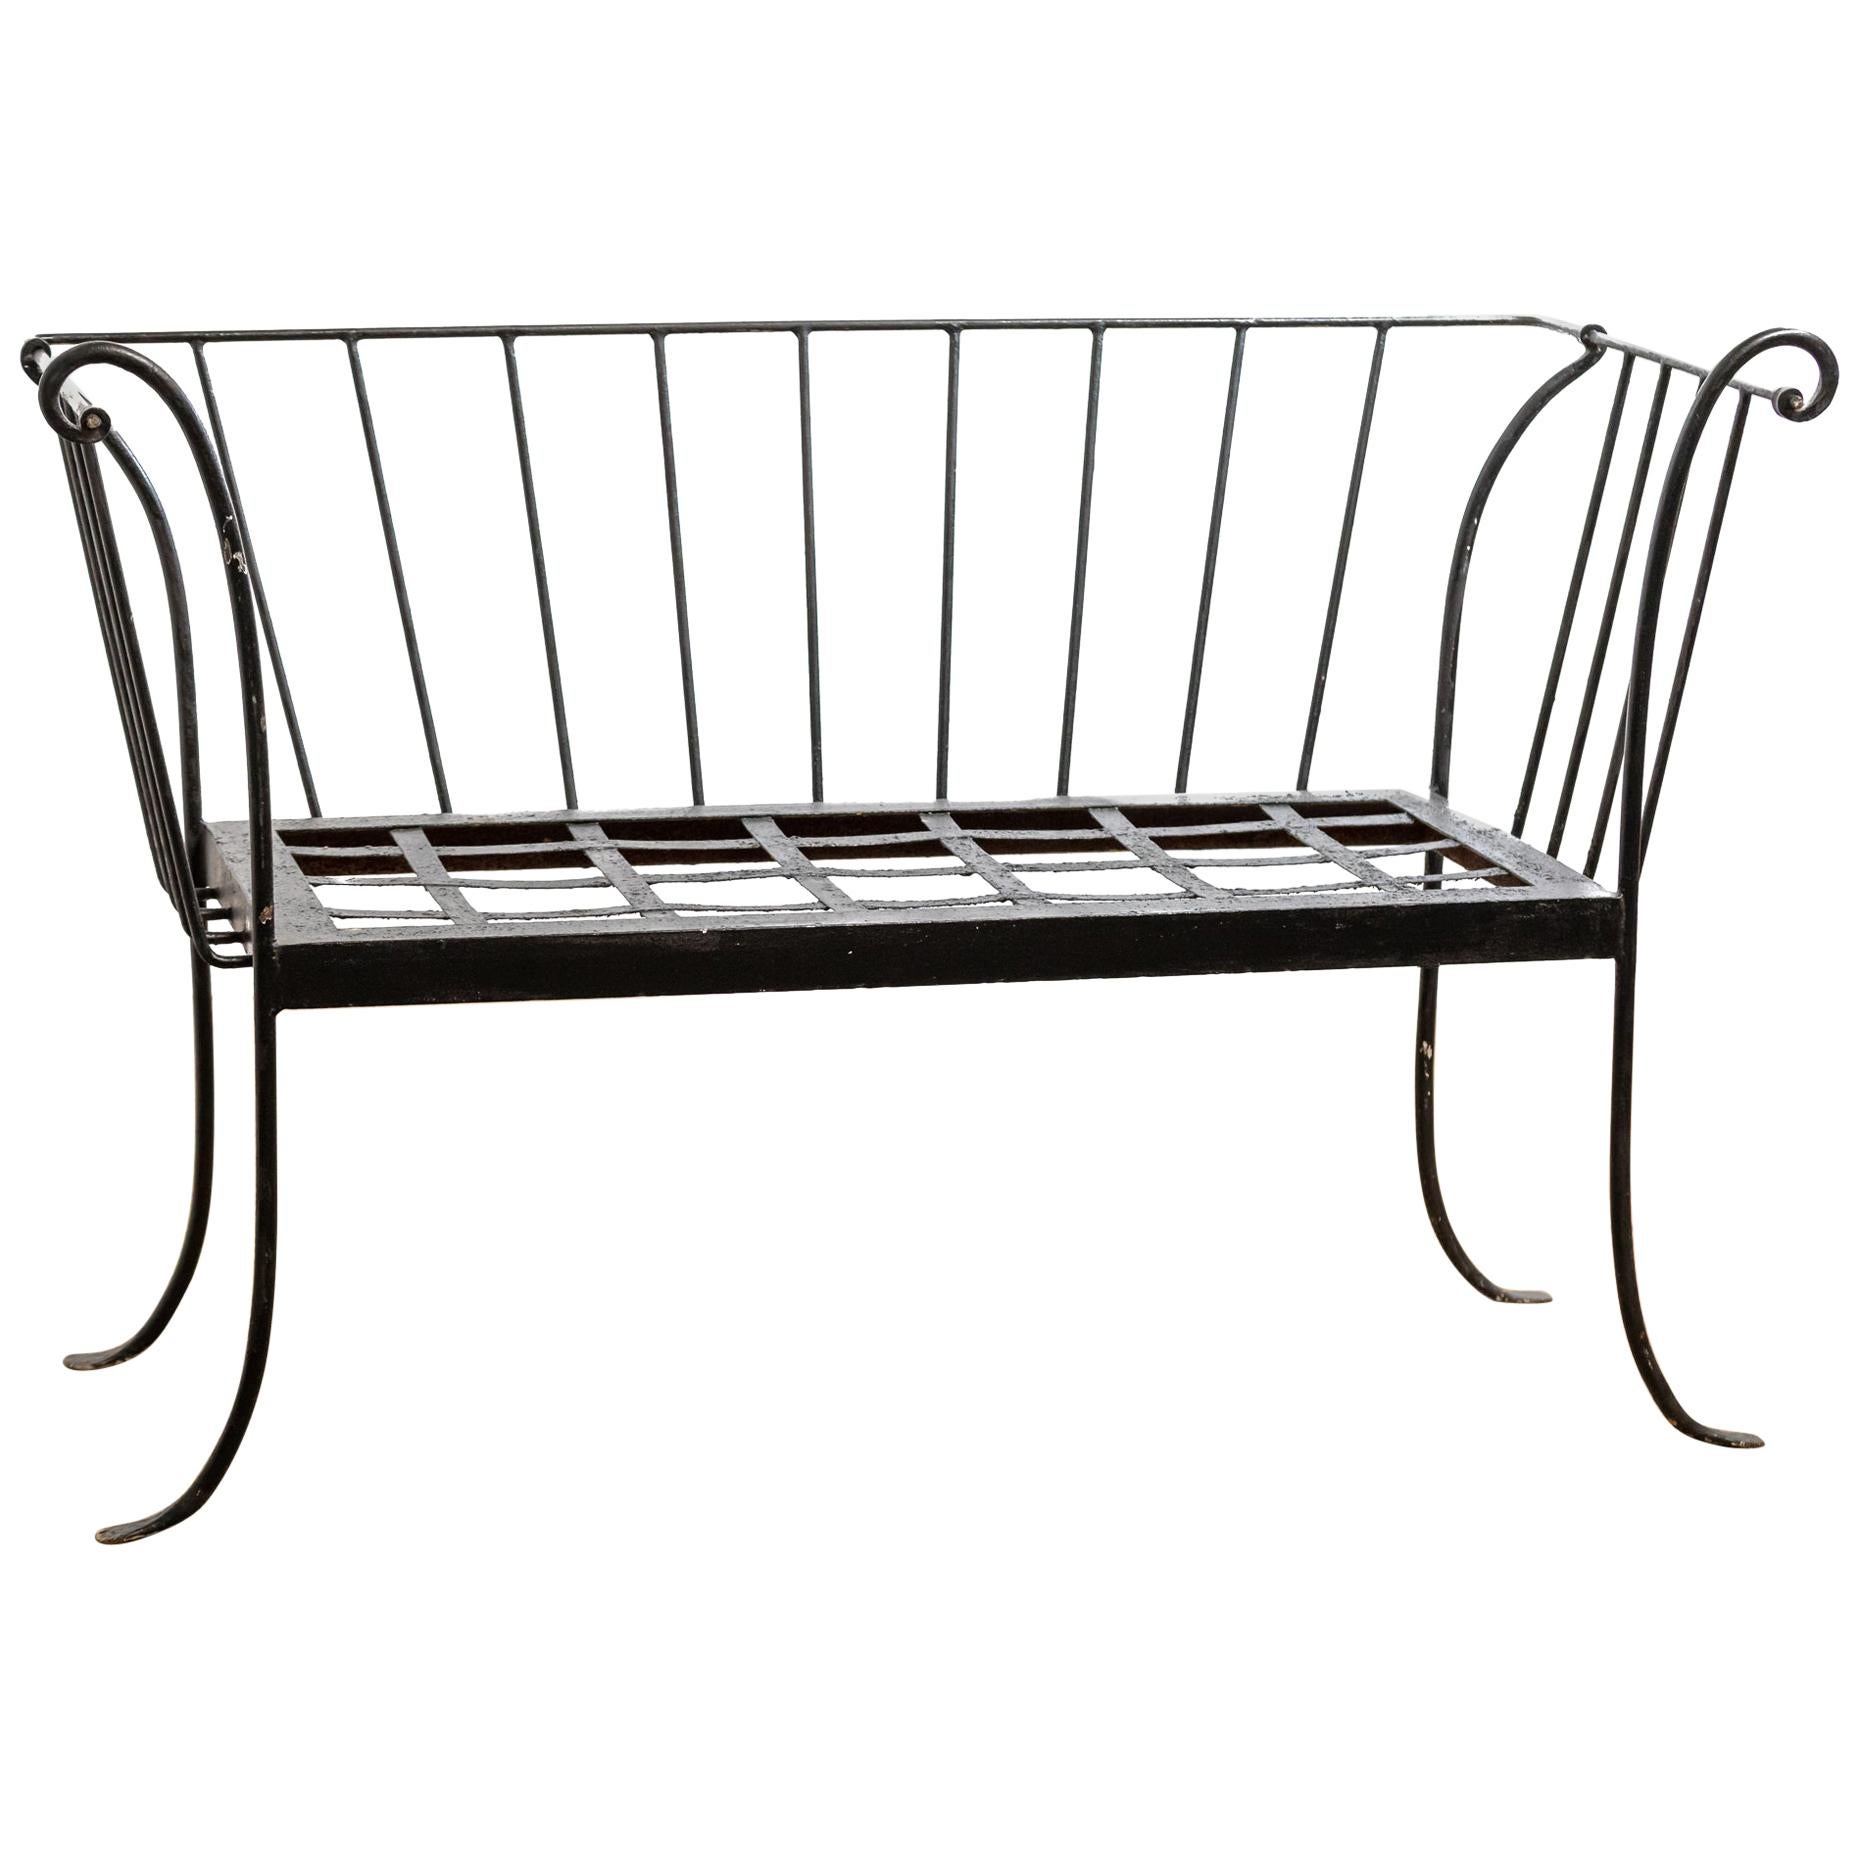 Antique Late 19th-Early 20th Century Wrought Iron "Deconstructed" Sofa Settee